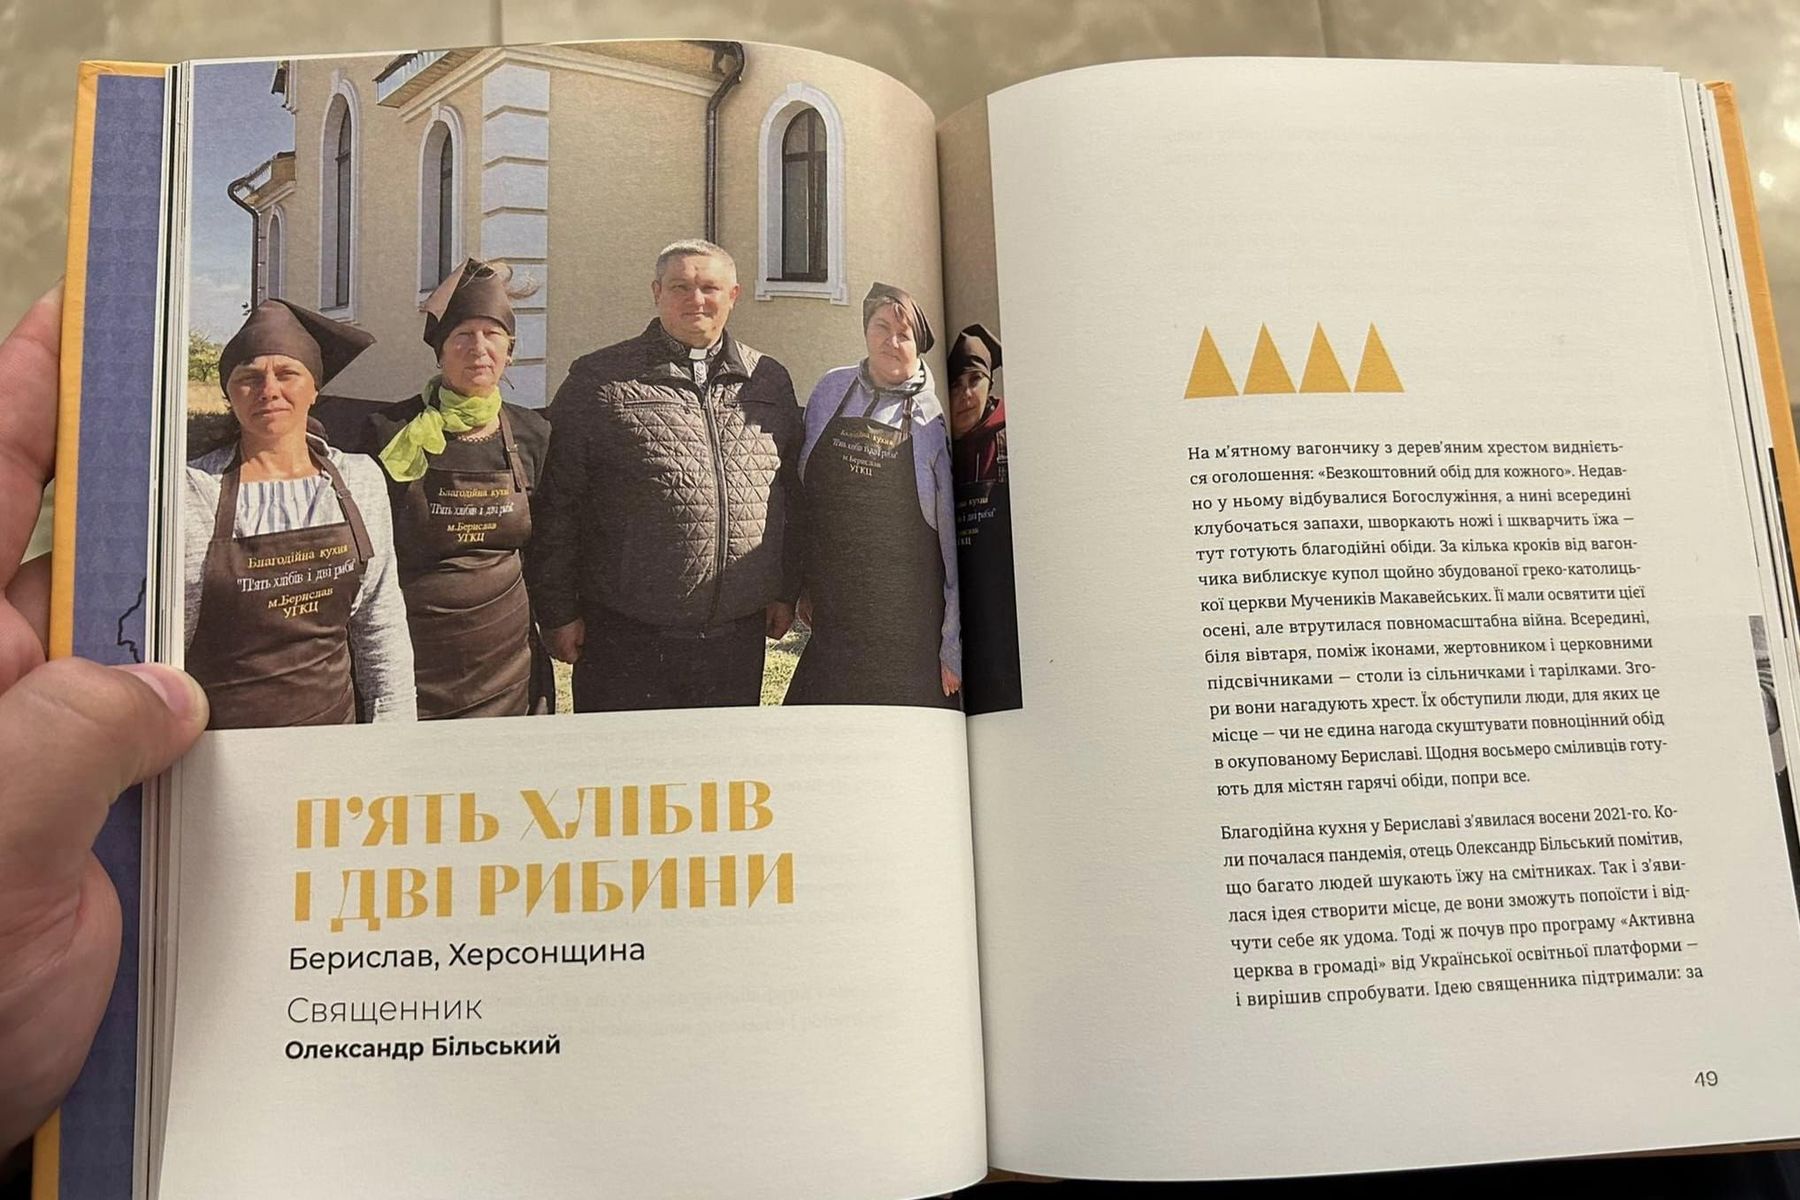 The story of the eat-in kitchen at the UGCC parish in Beryslav featured in the book “Startups of Good”